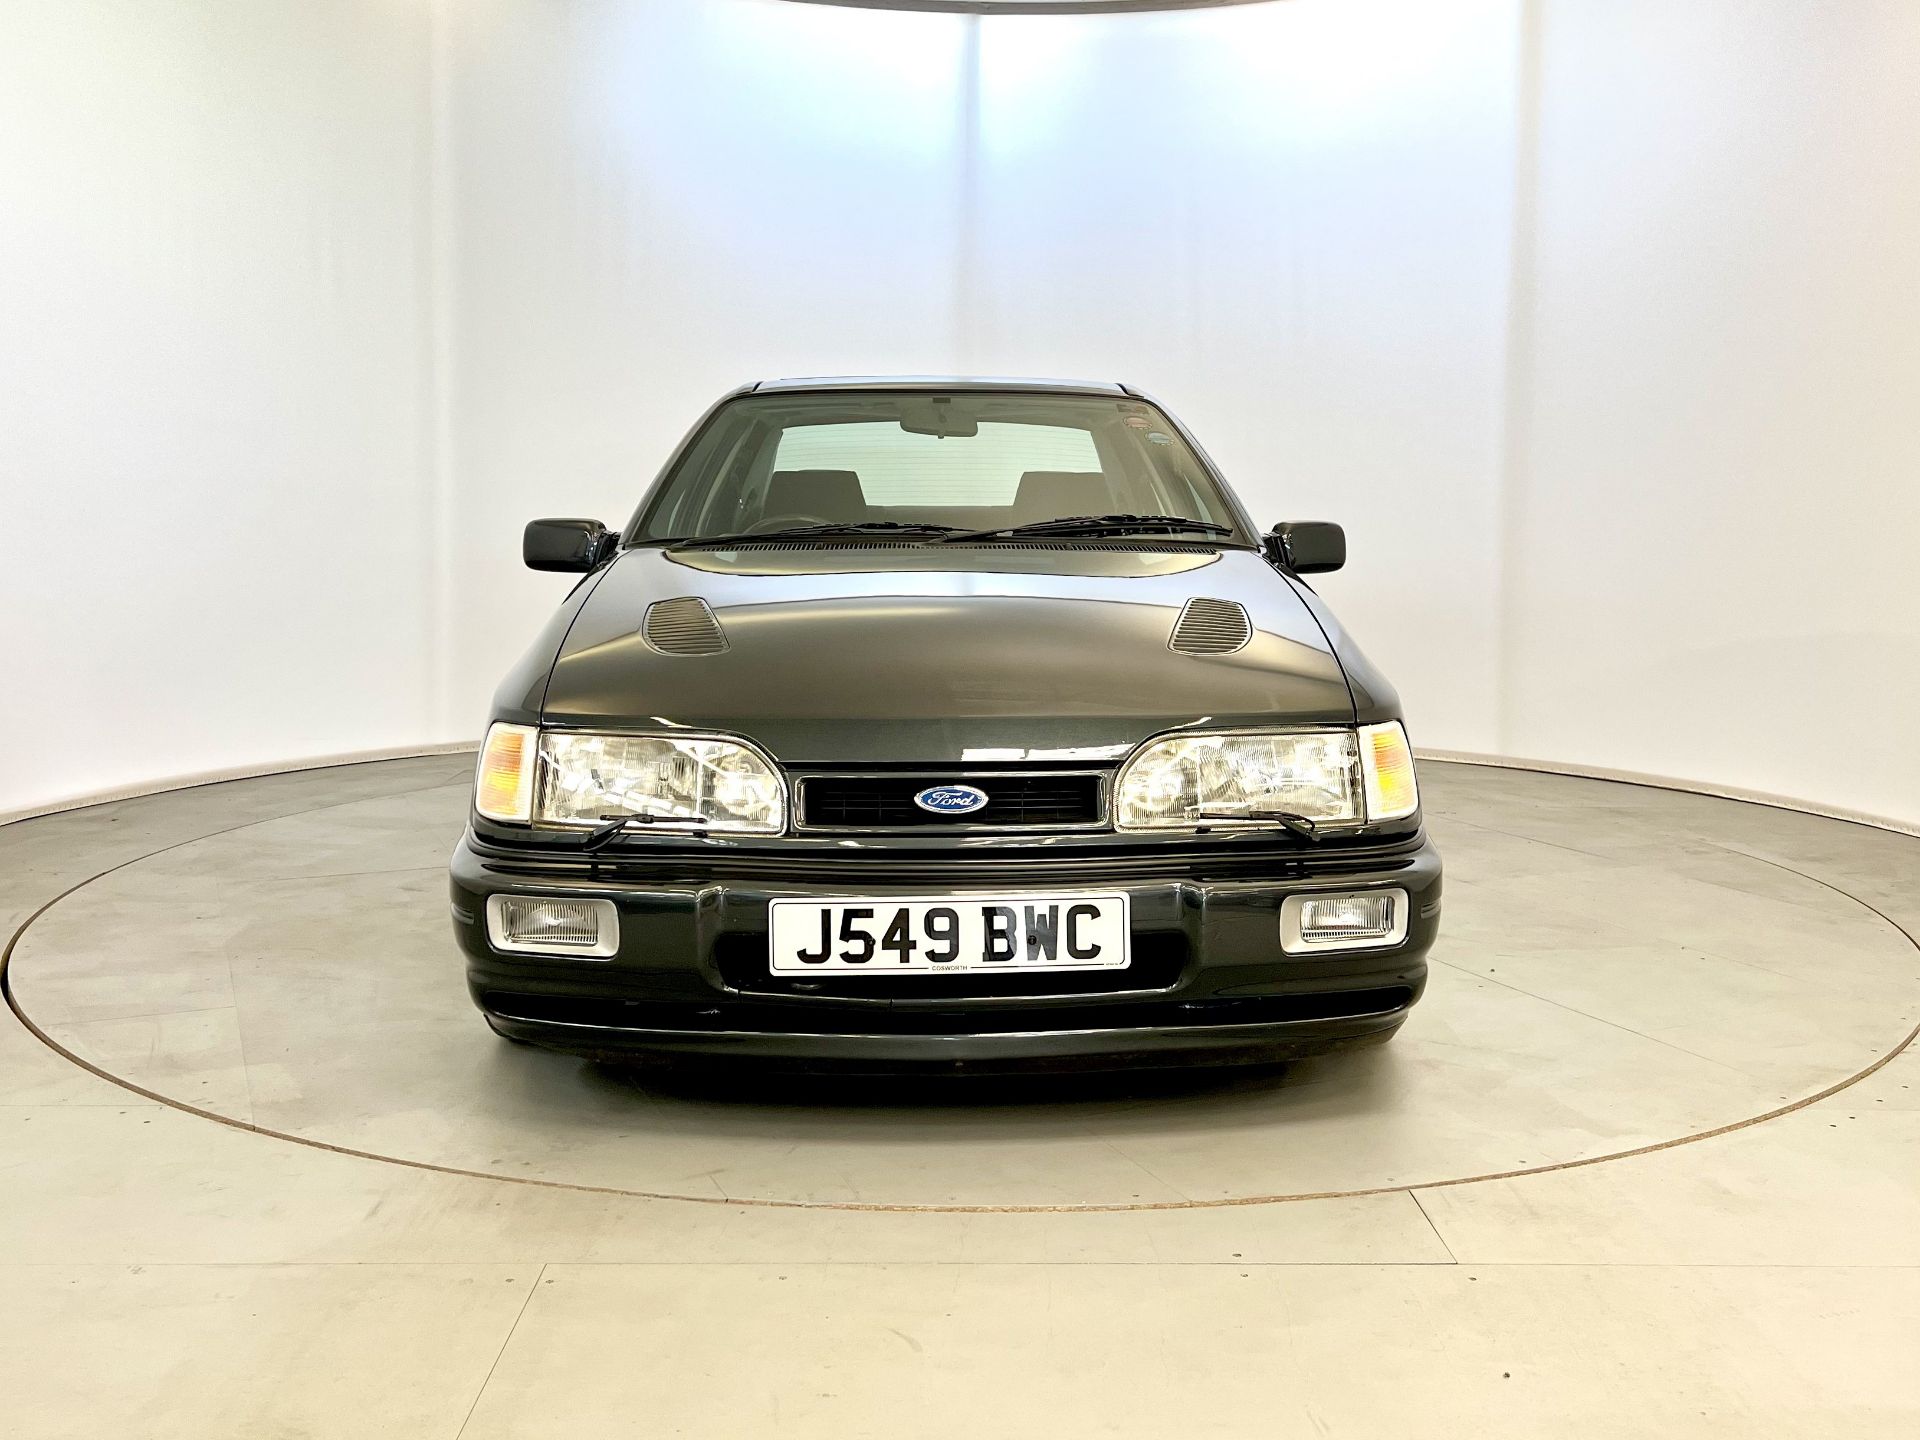 Ford Sierra Sapphire Cosworth - Image 2 of 37